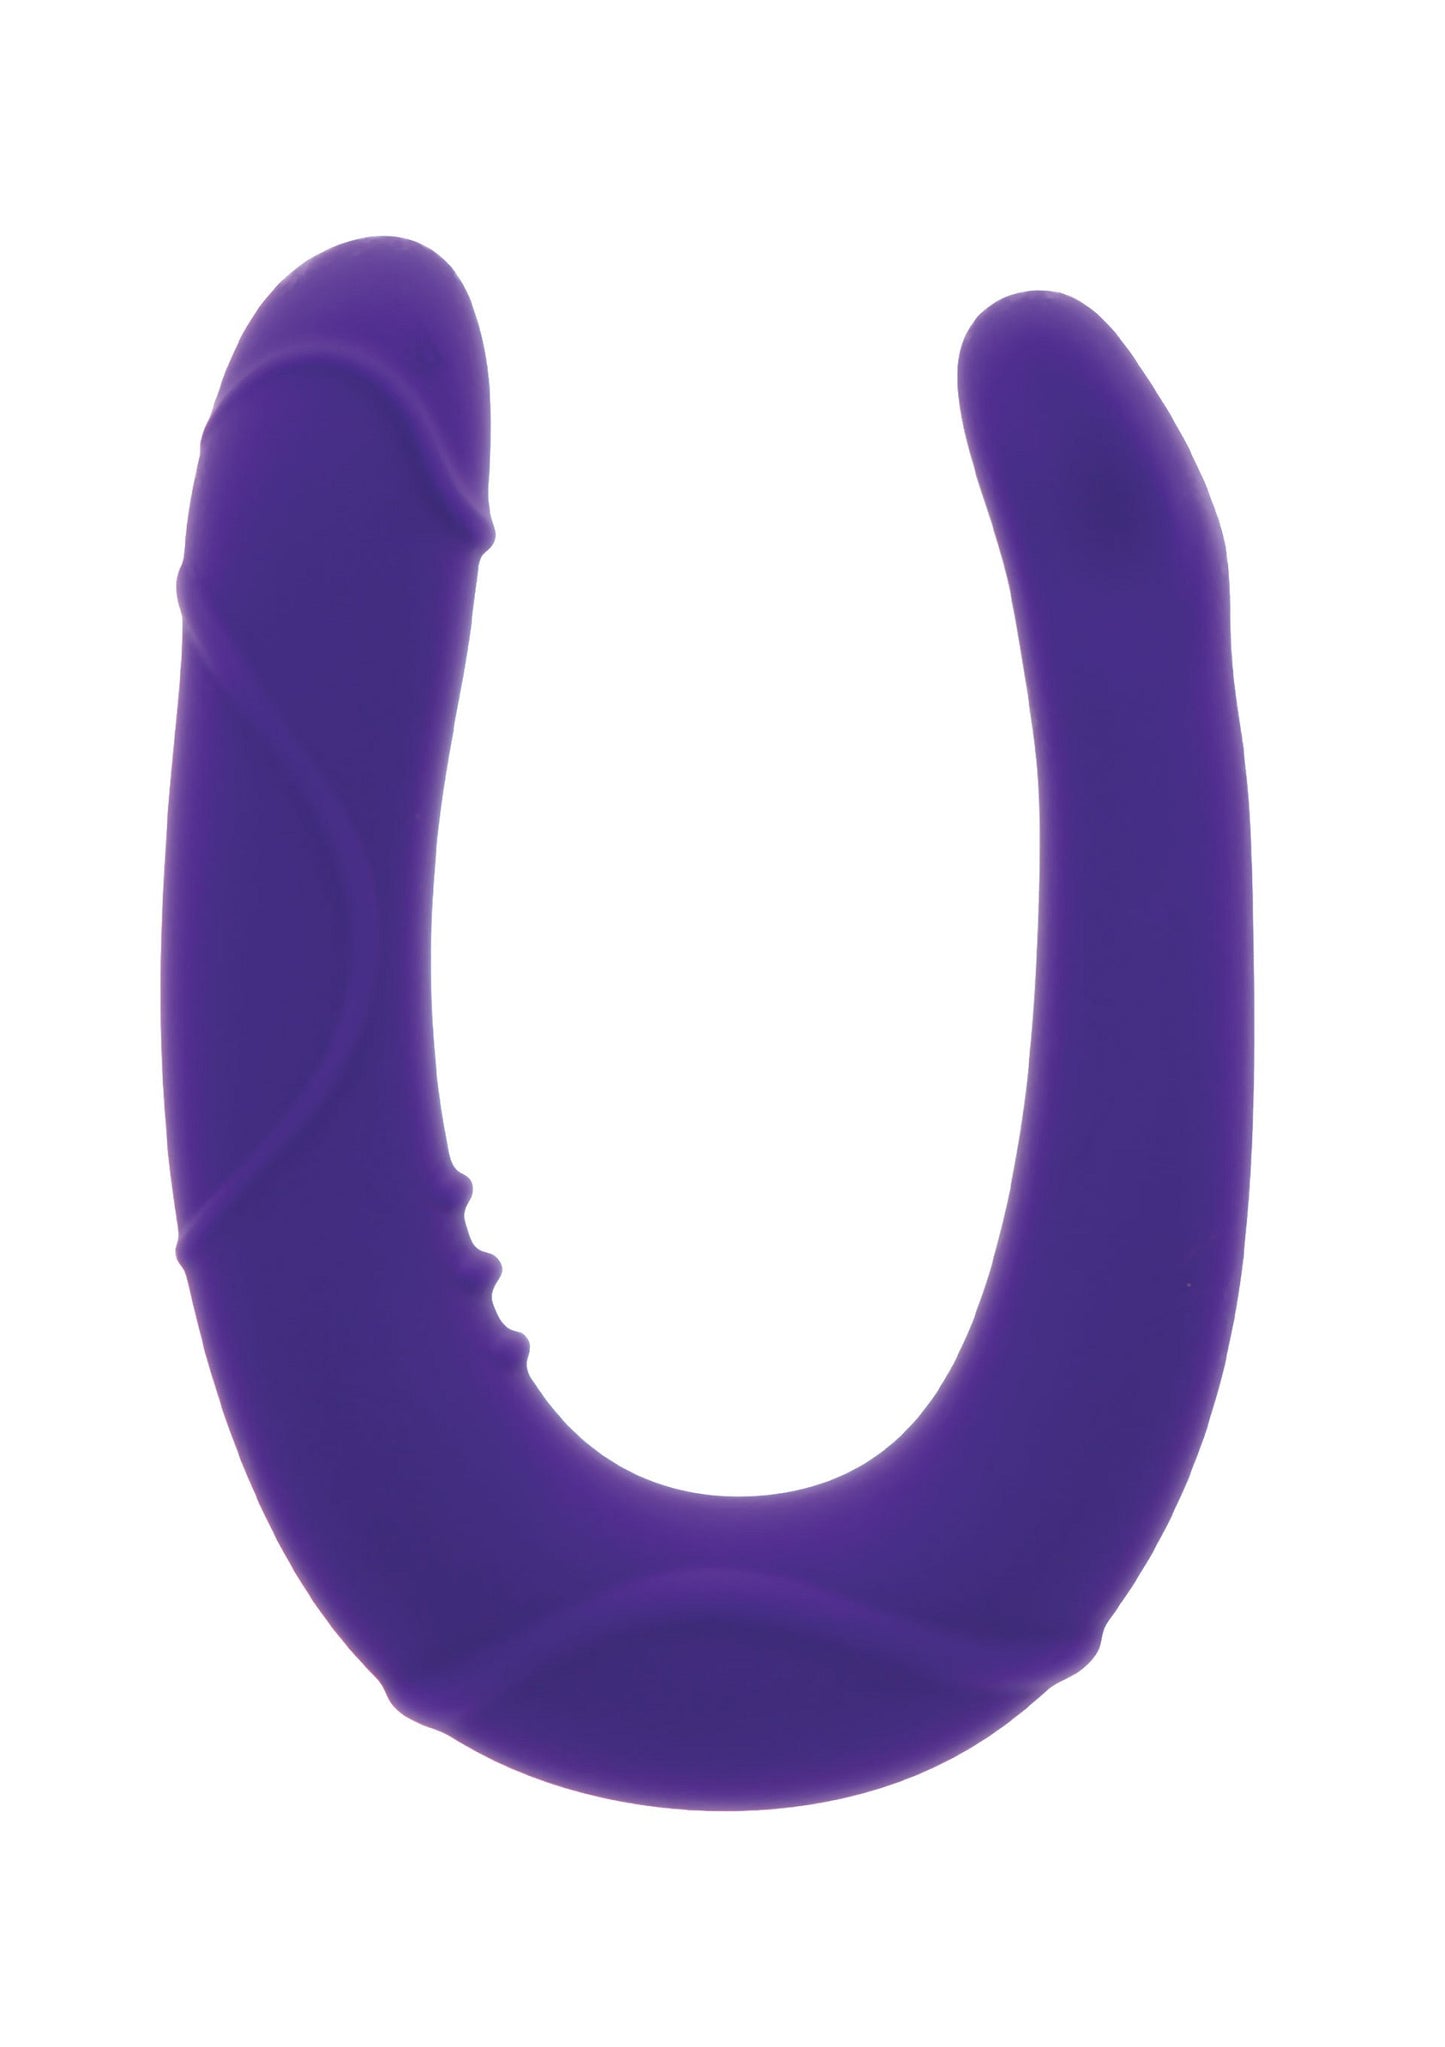 ToyJoy Get Real Vogue Mini Double Dong PURPLE - 0